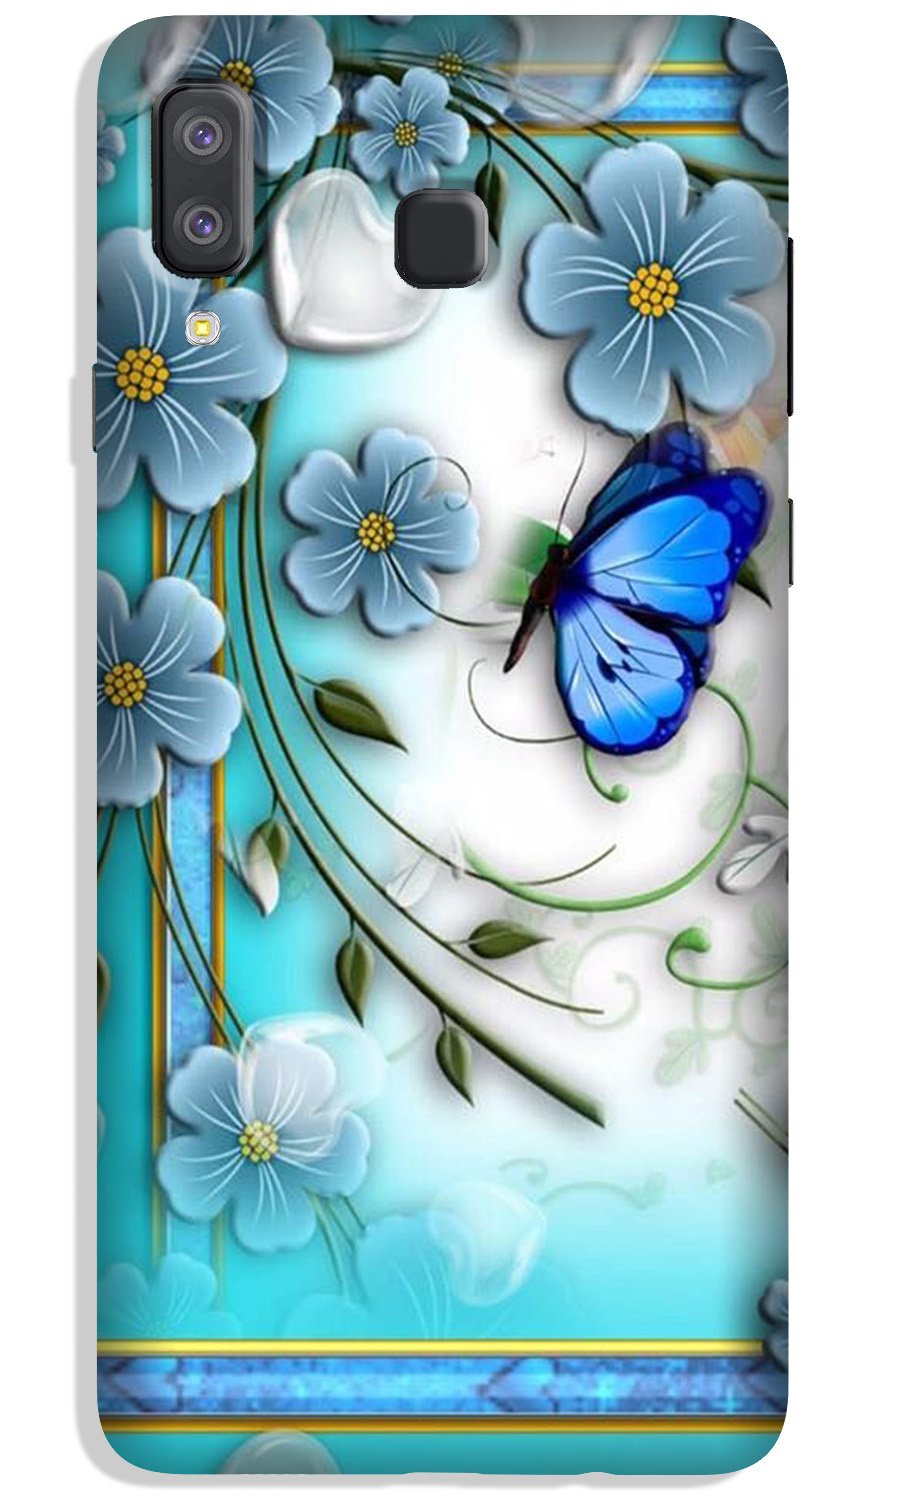 Blue Butterfly Case for Galaxy A8 Star